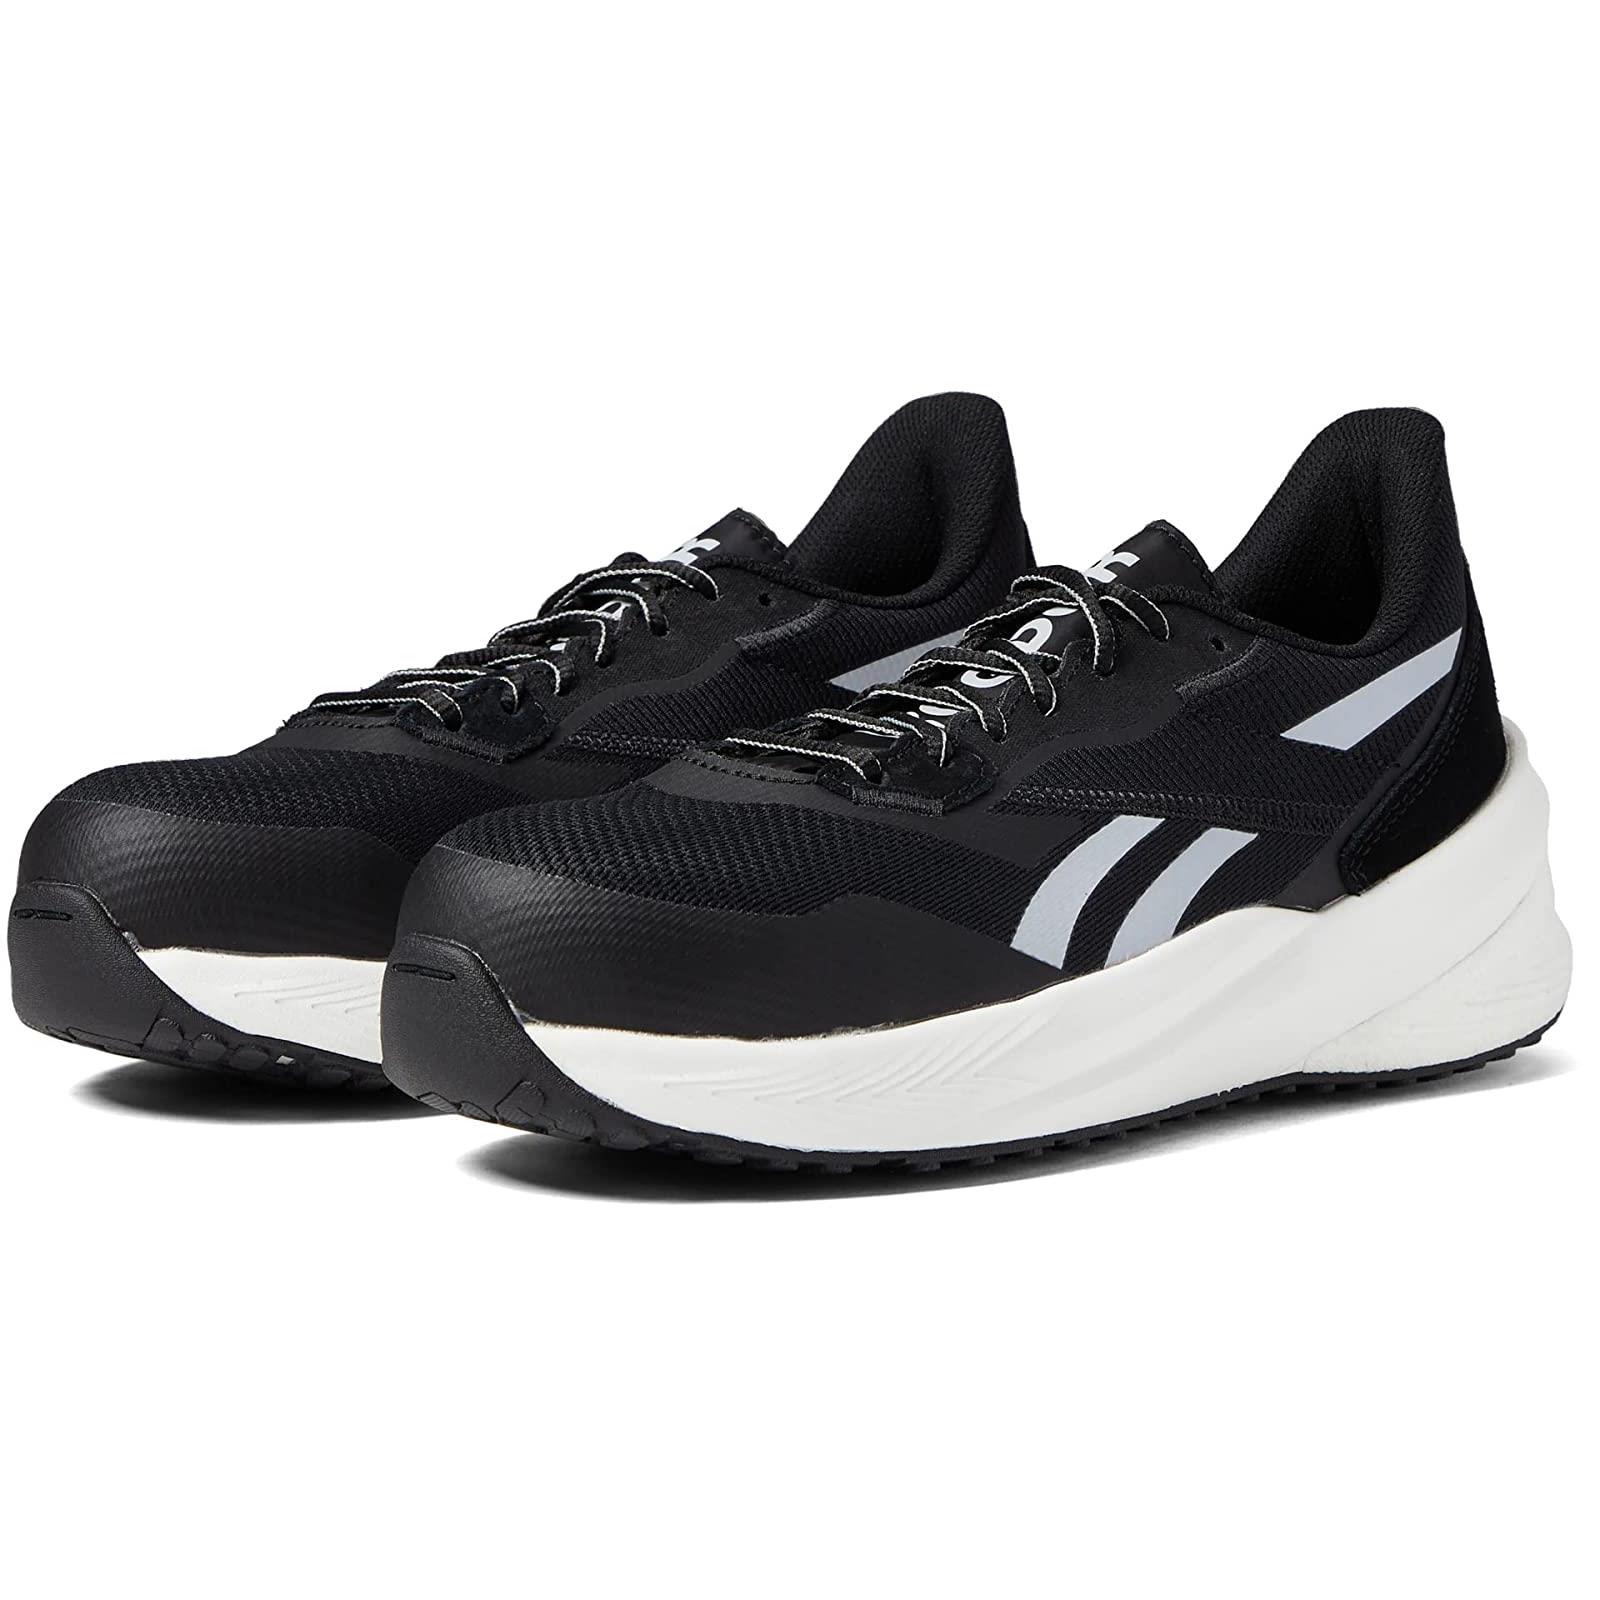 Woman`s Shoes Reebok Work Floatride Energy Daily Work EH Comp Toe Black/White